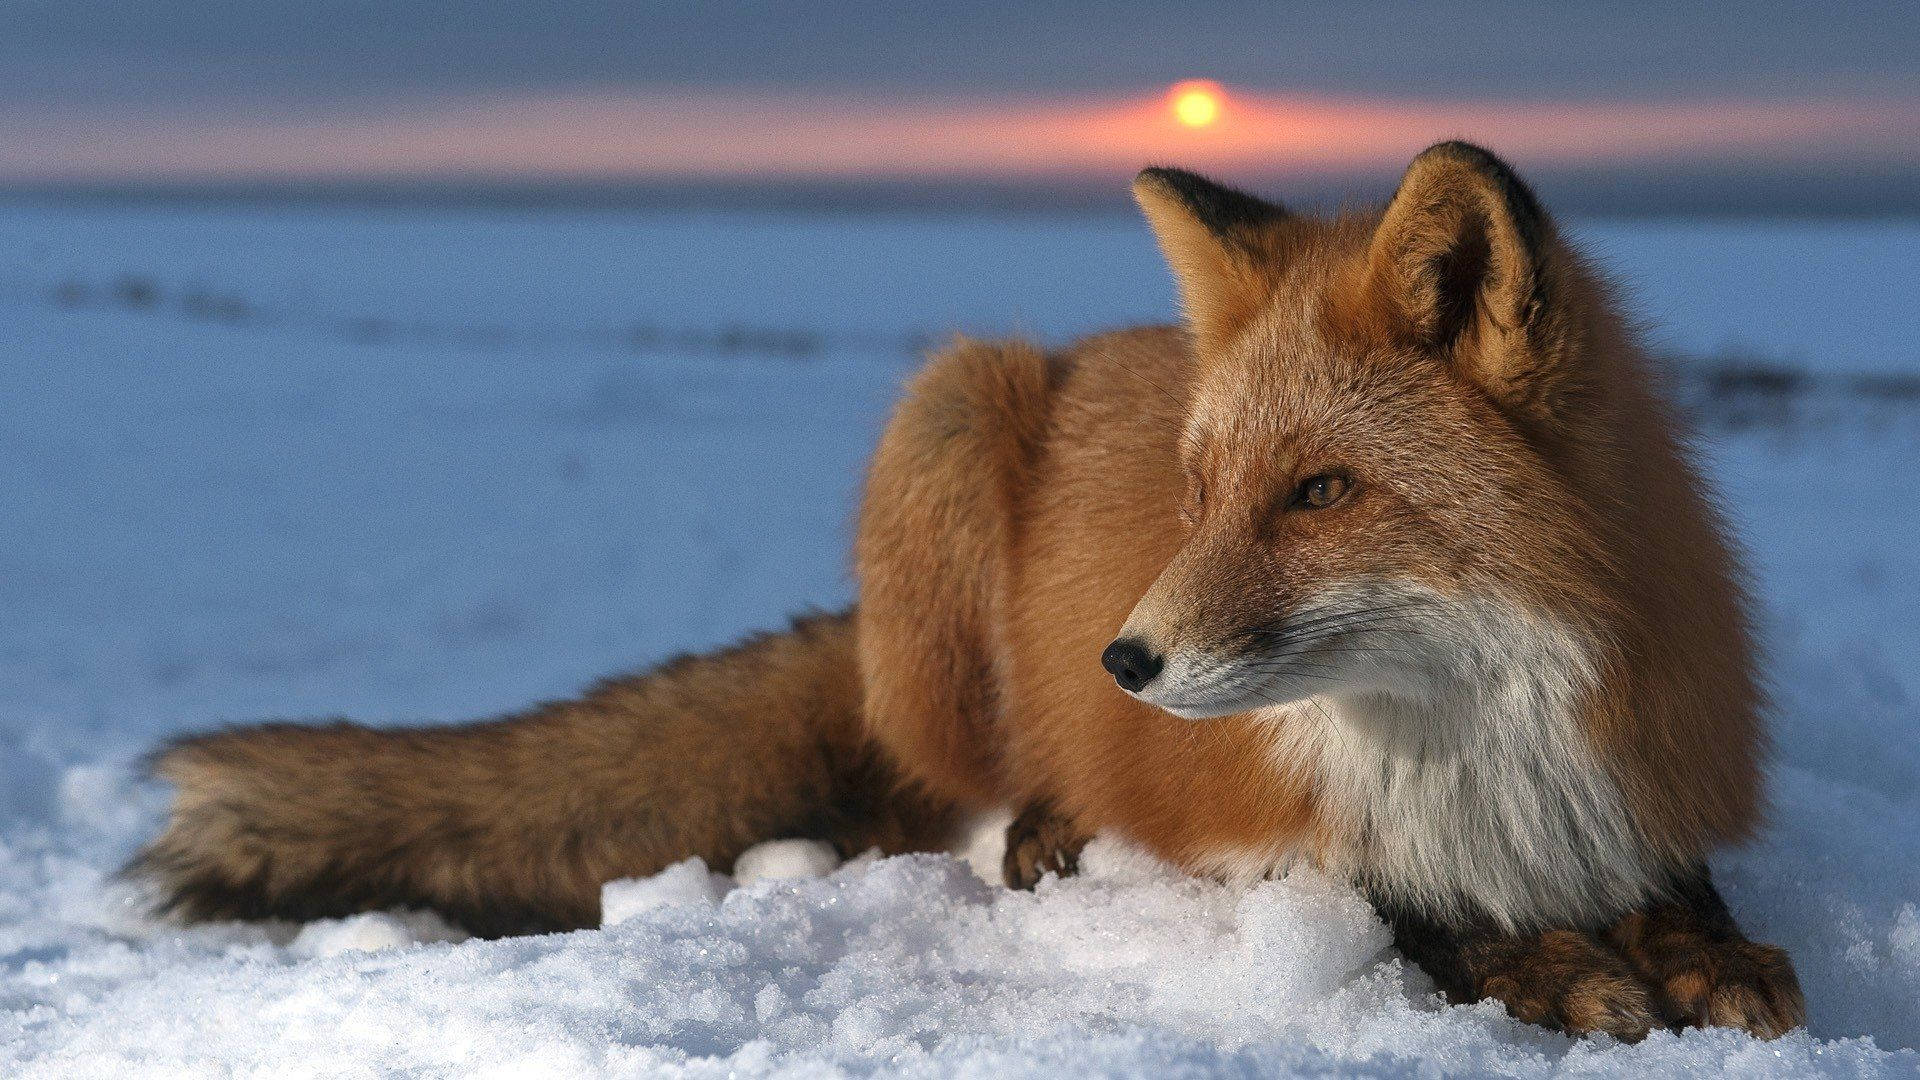 A beautiful fox in the sunset Wallpaper